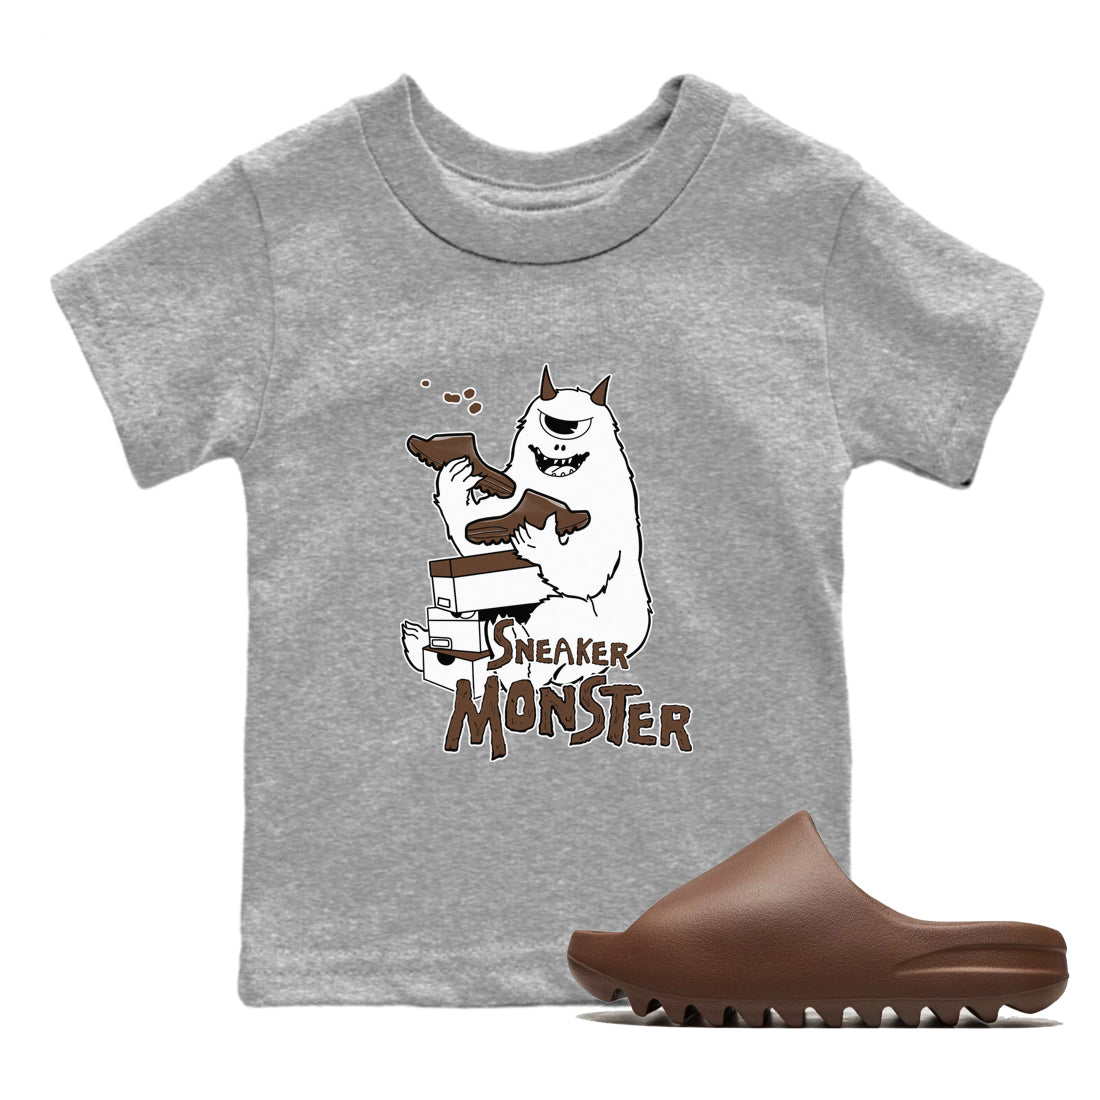 Yeezy Slide Flax shirts to match jordans Sneaker Monster sneaker match tees Yeezy Slide Flax SNRT Sneaker Tees streetwear brand Baby and Youth Heather Grey 1 cotton tee